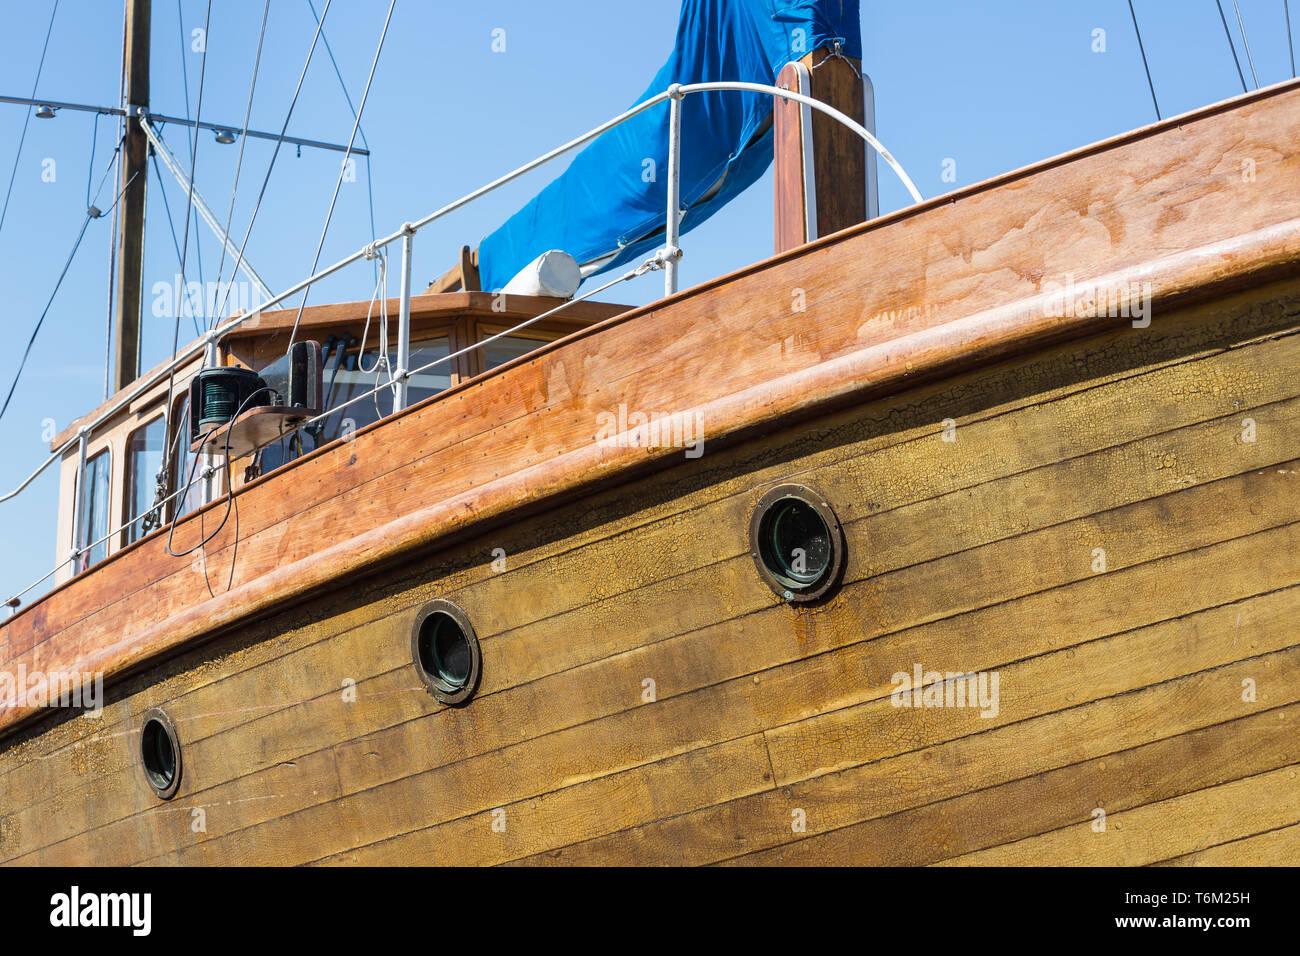 Front view of wooden yacht Stock Photo